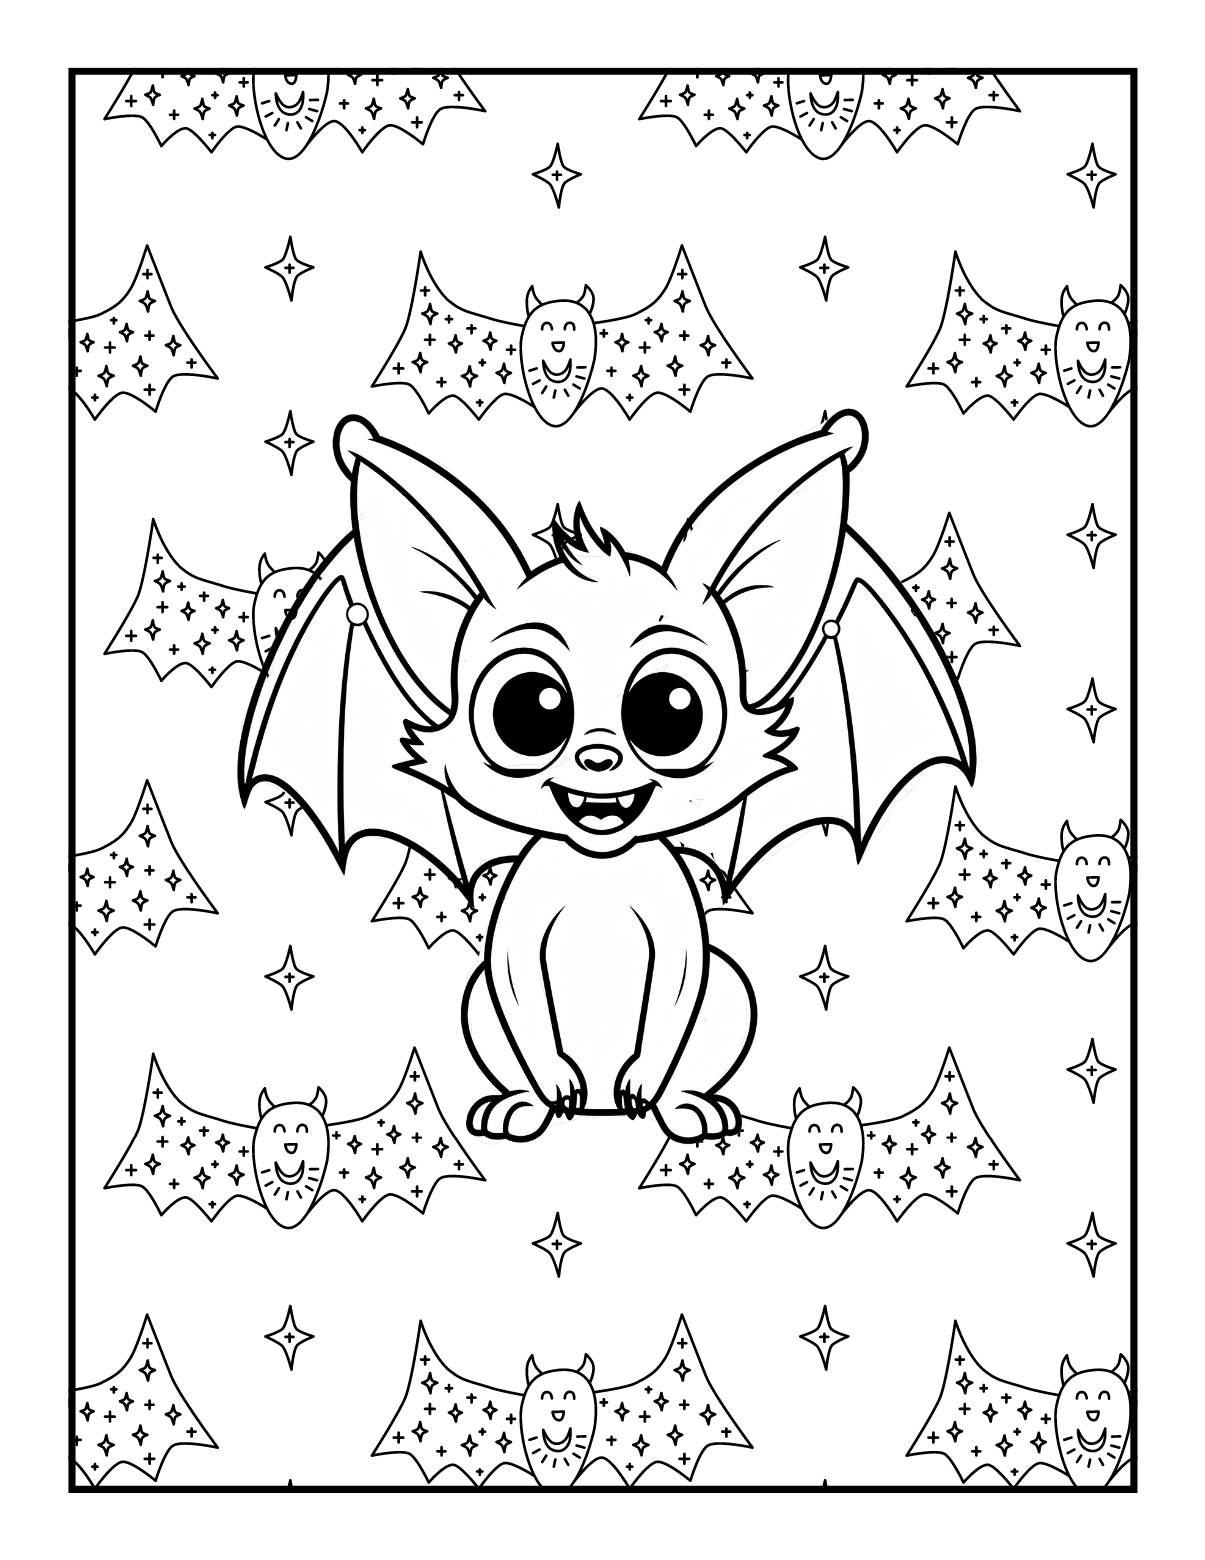 Cute bat coloring pages for kids.